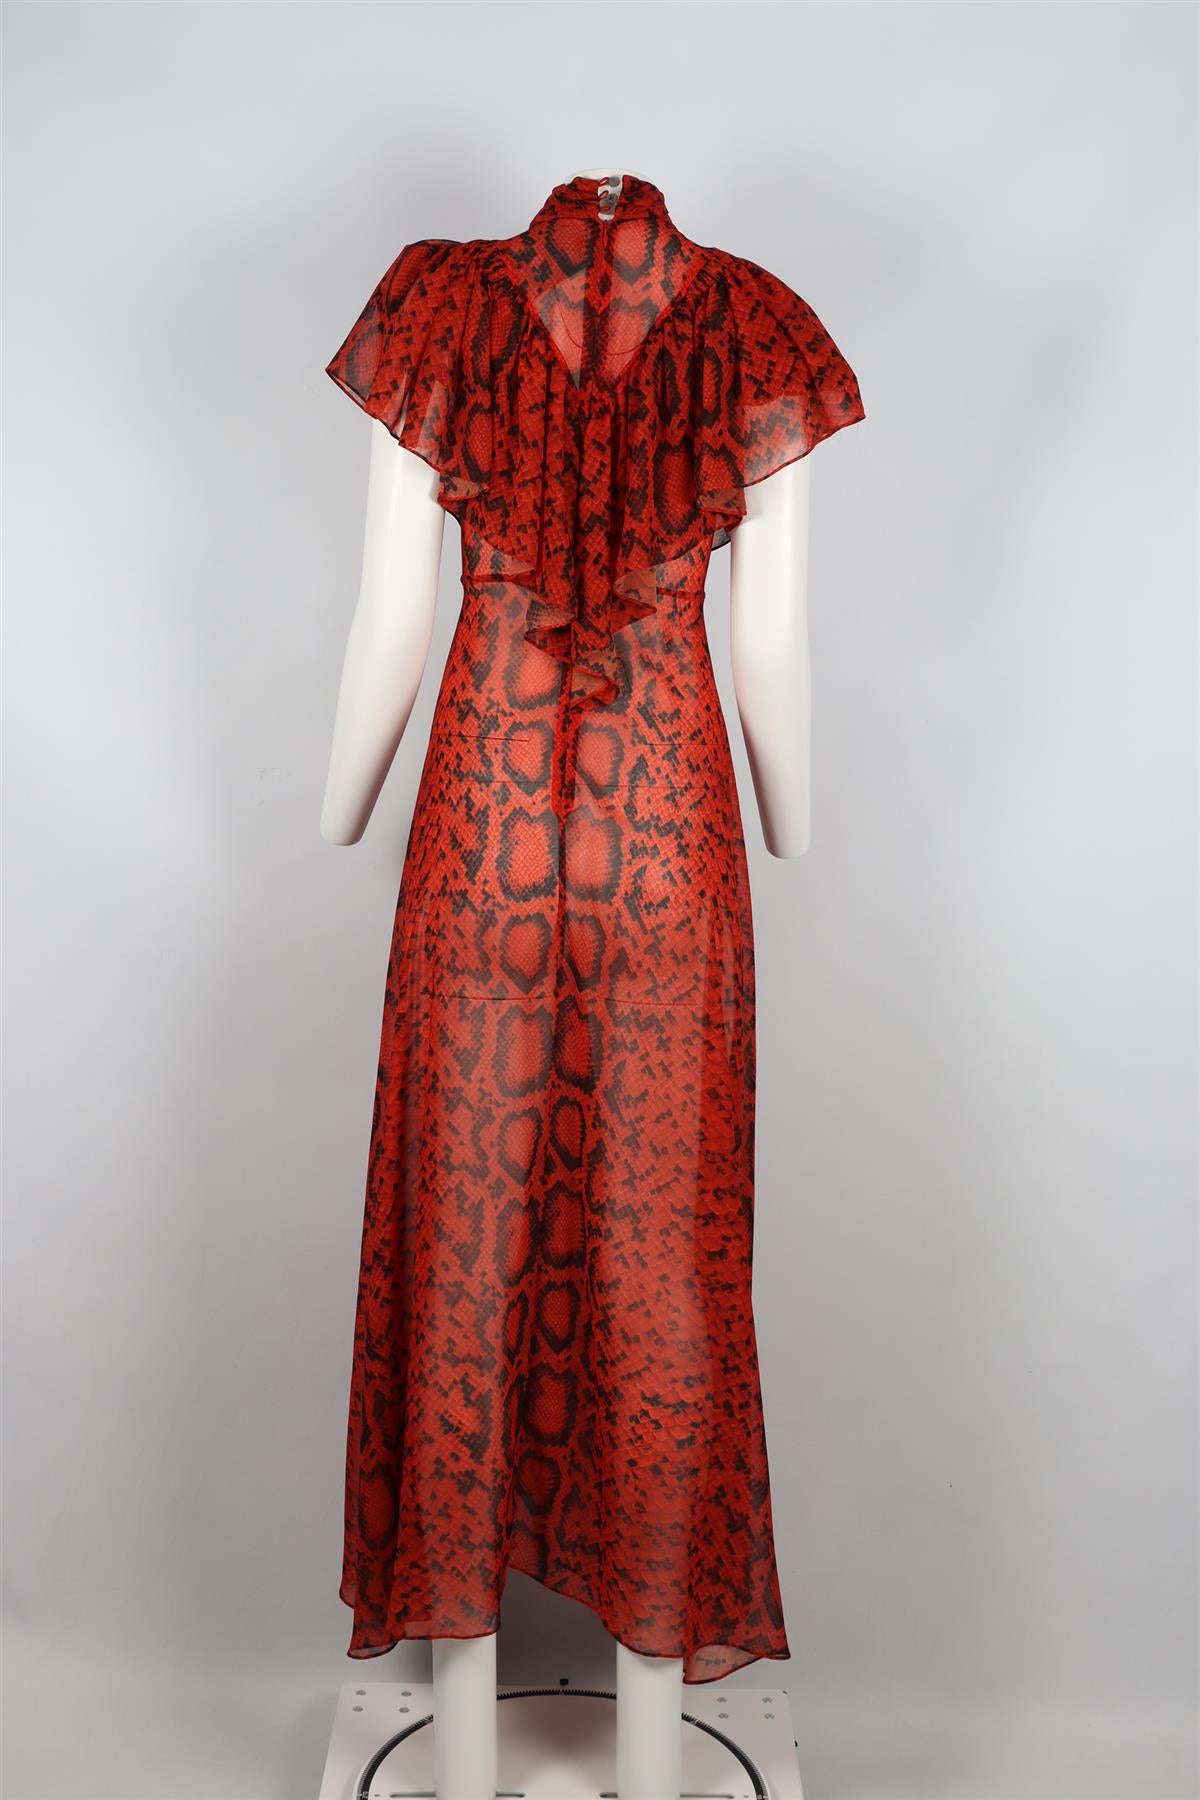 PREEN BY THORNTON BREGAZZI RED AND BLACK PRINTED CREPE MAXI DRESS XSMALL